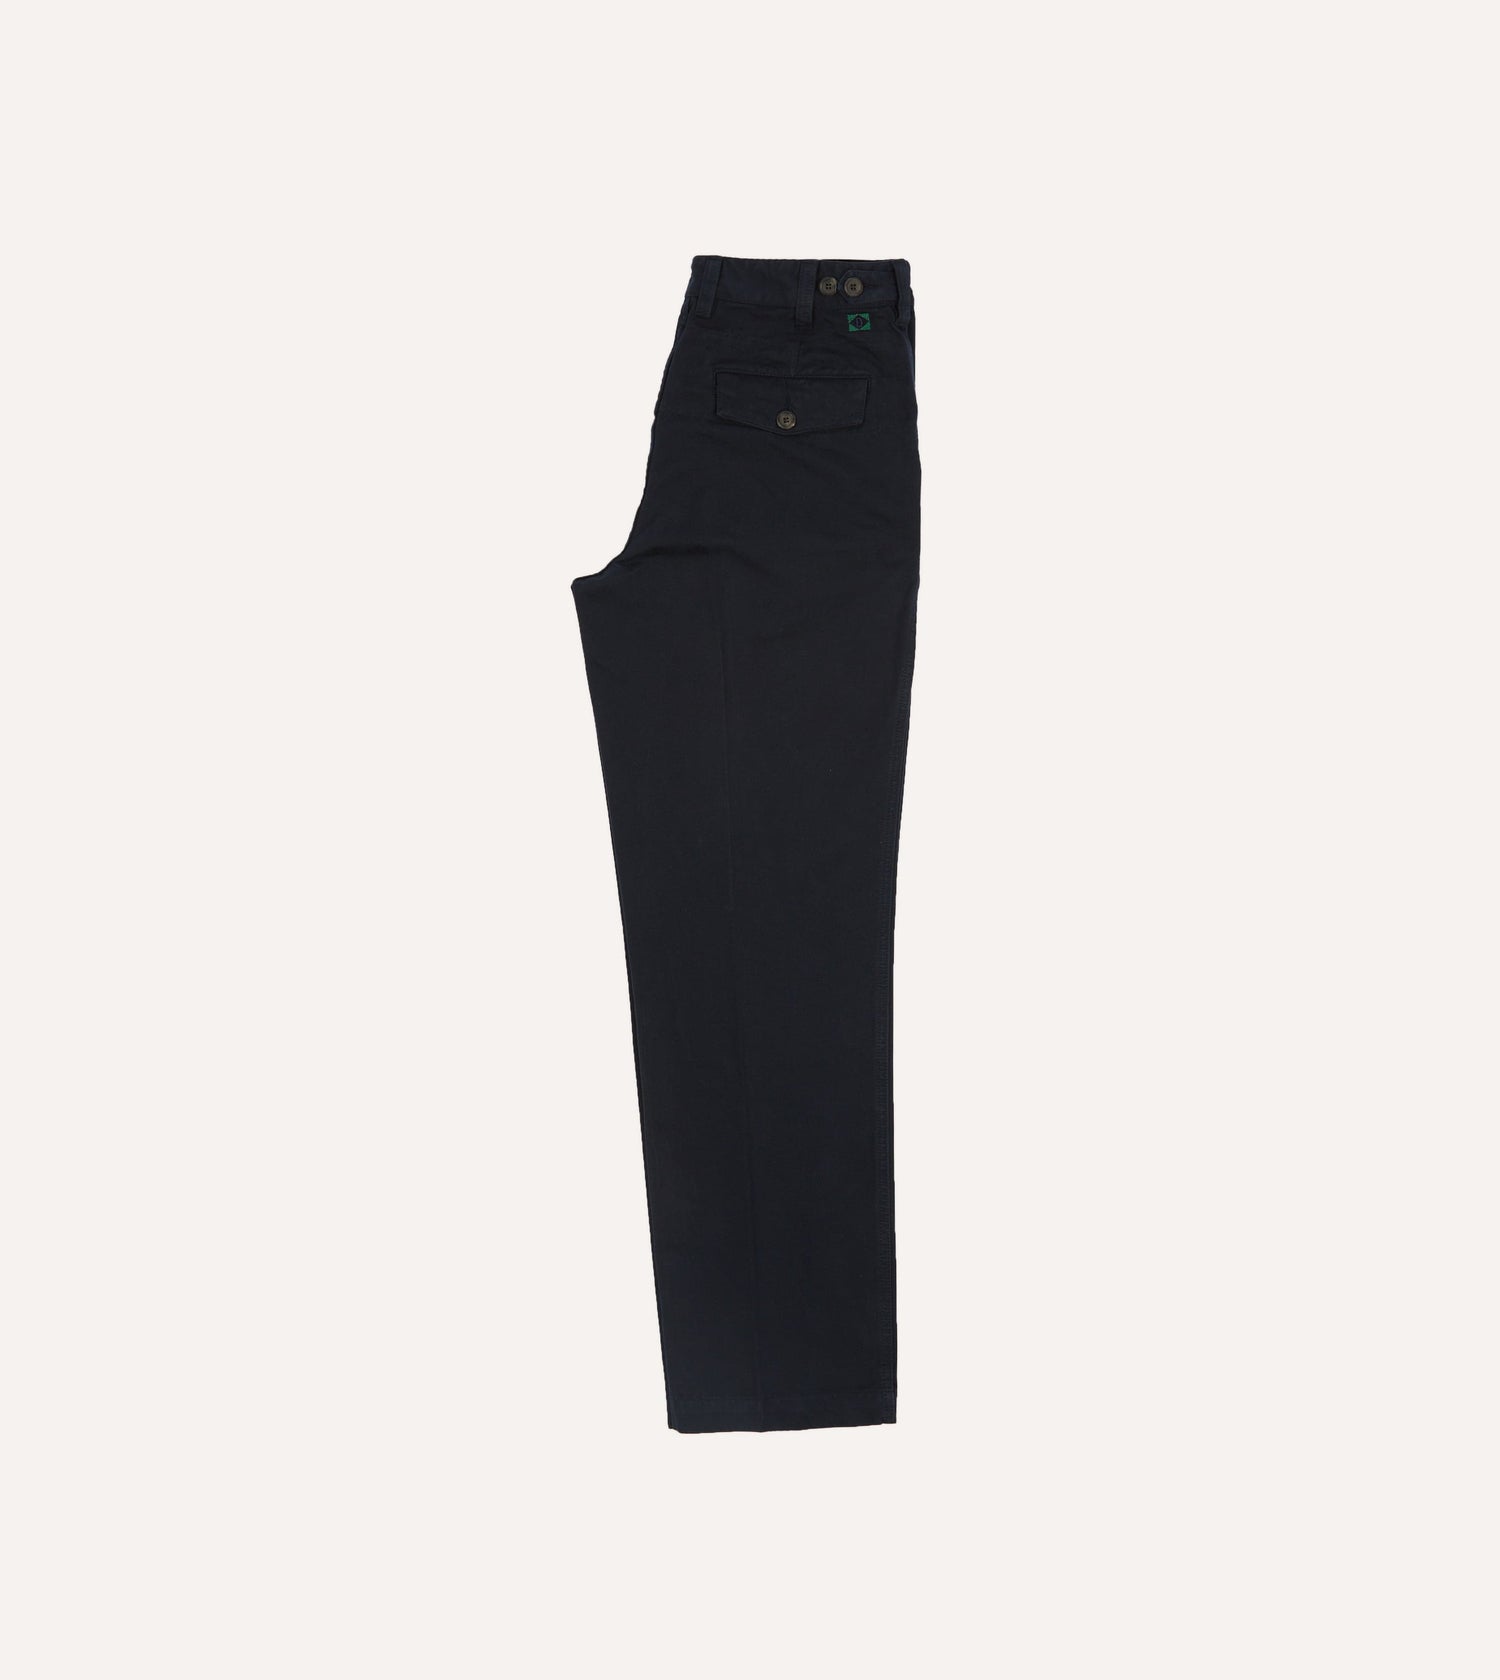 Navy Textured Cotton Flat Front Chino